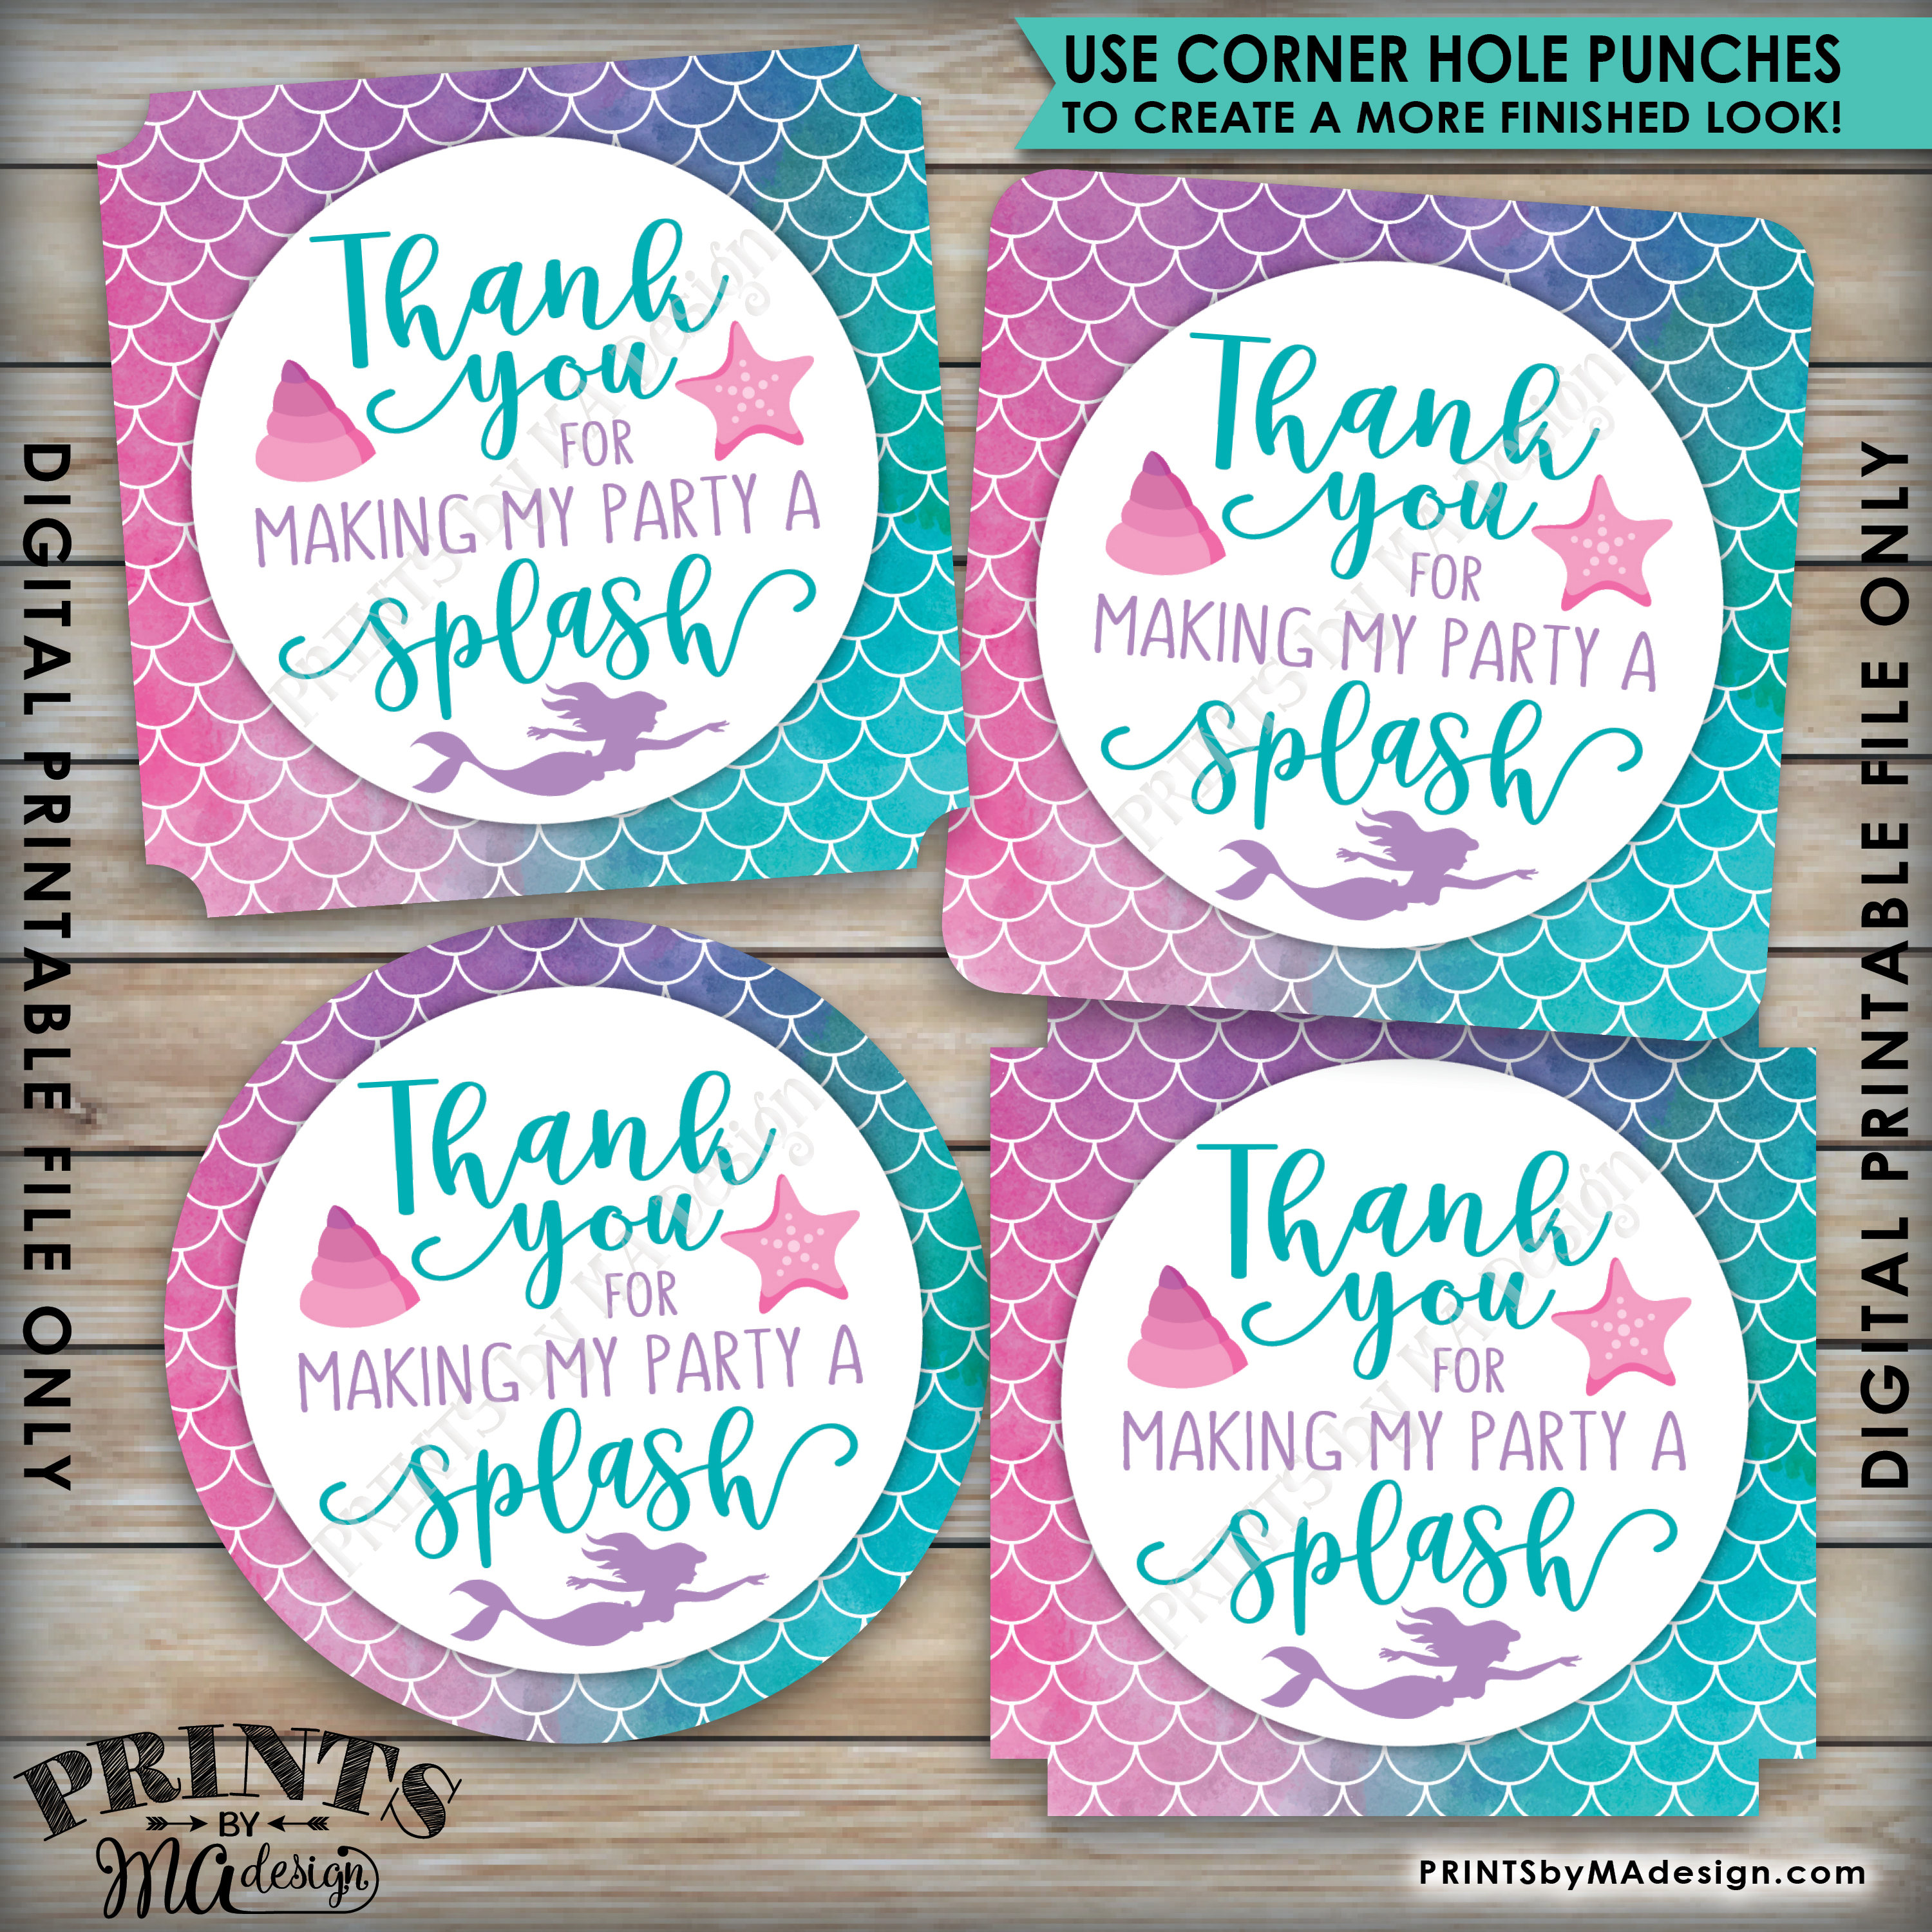 mermaid-party-thank-you-tags-birthday-party-under-the-sea-splash